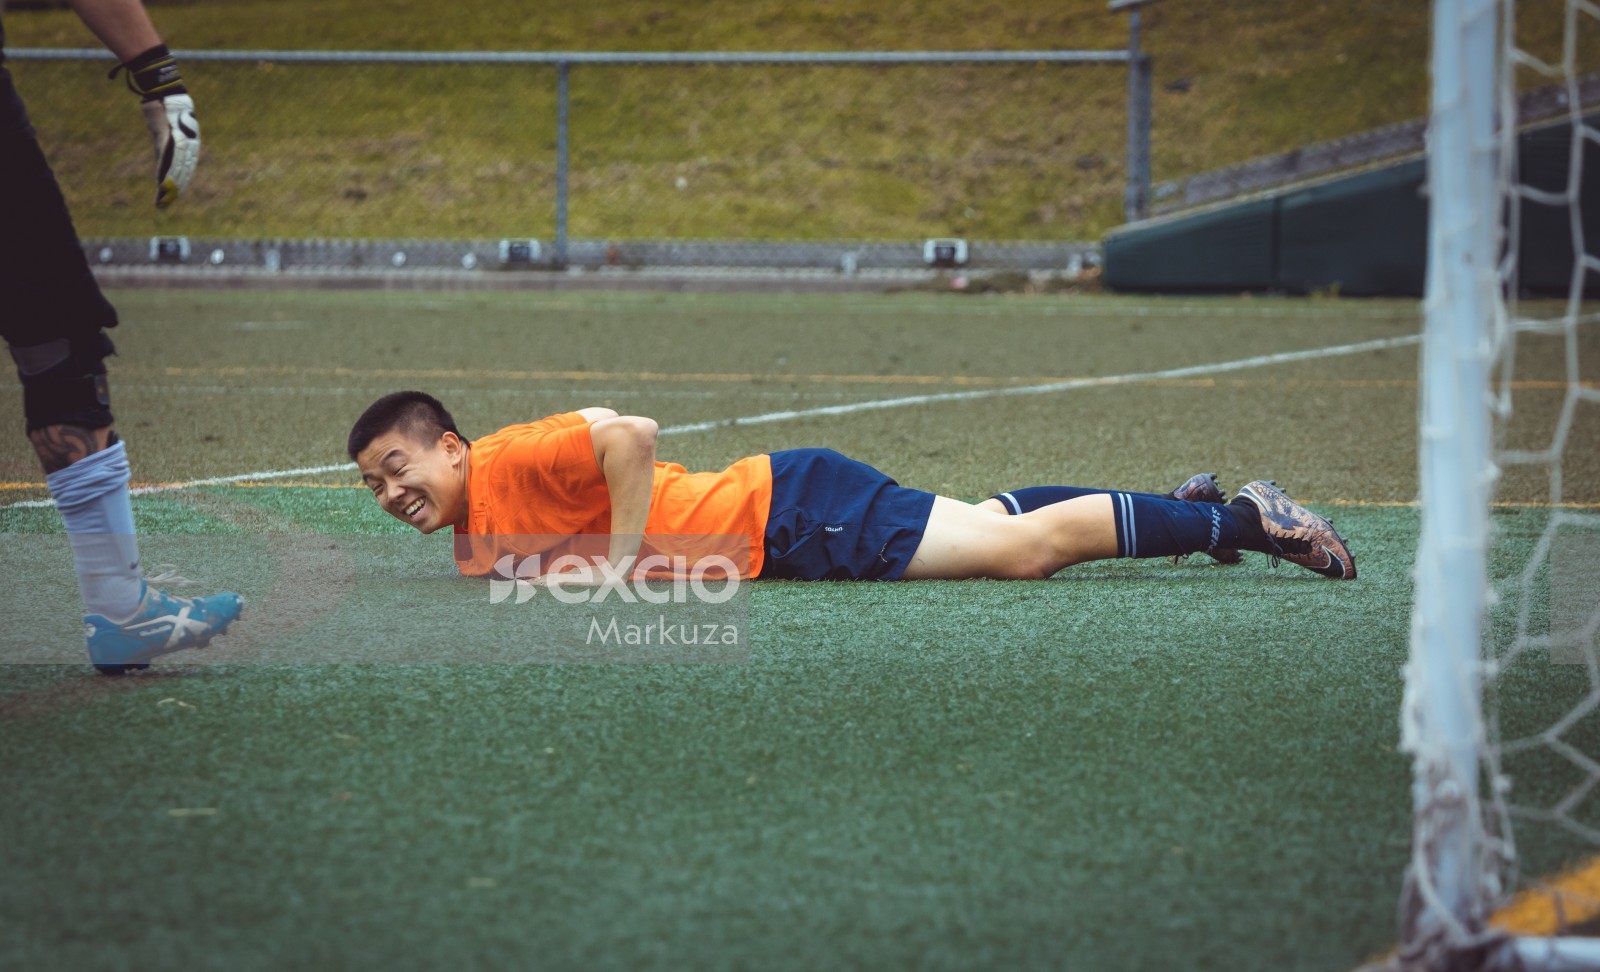 Smiling player lying on the grass - Sports Zone sunday league